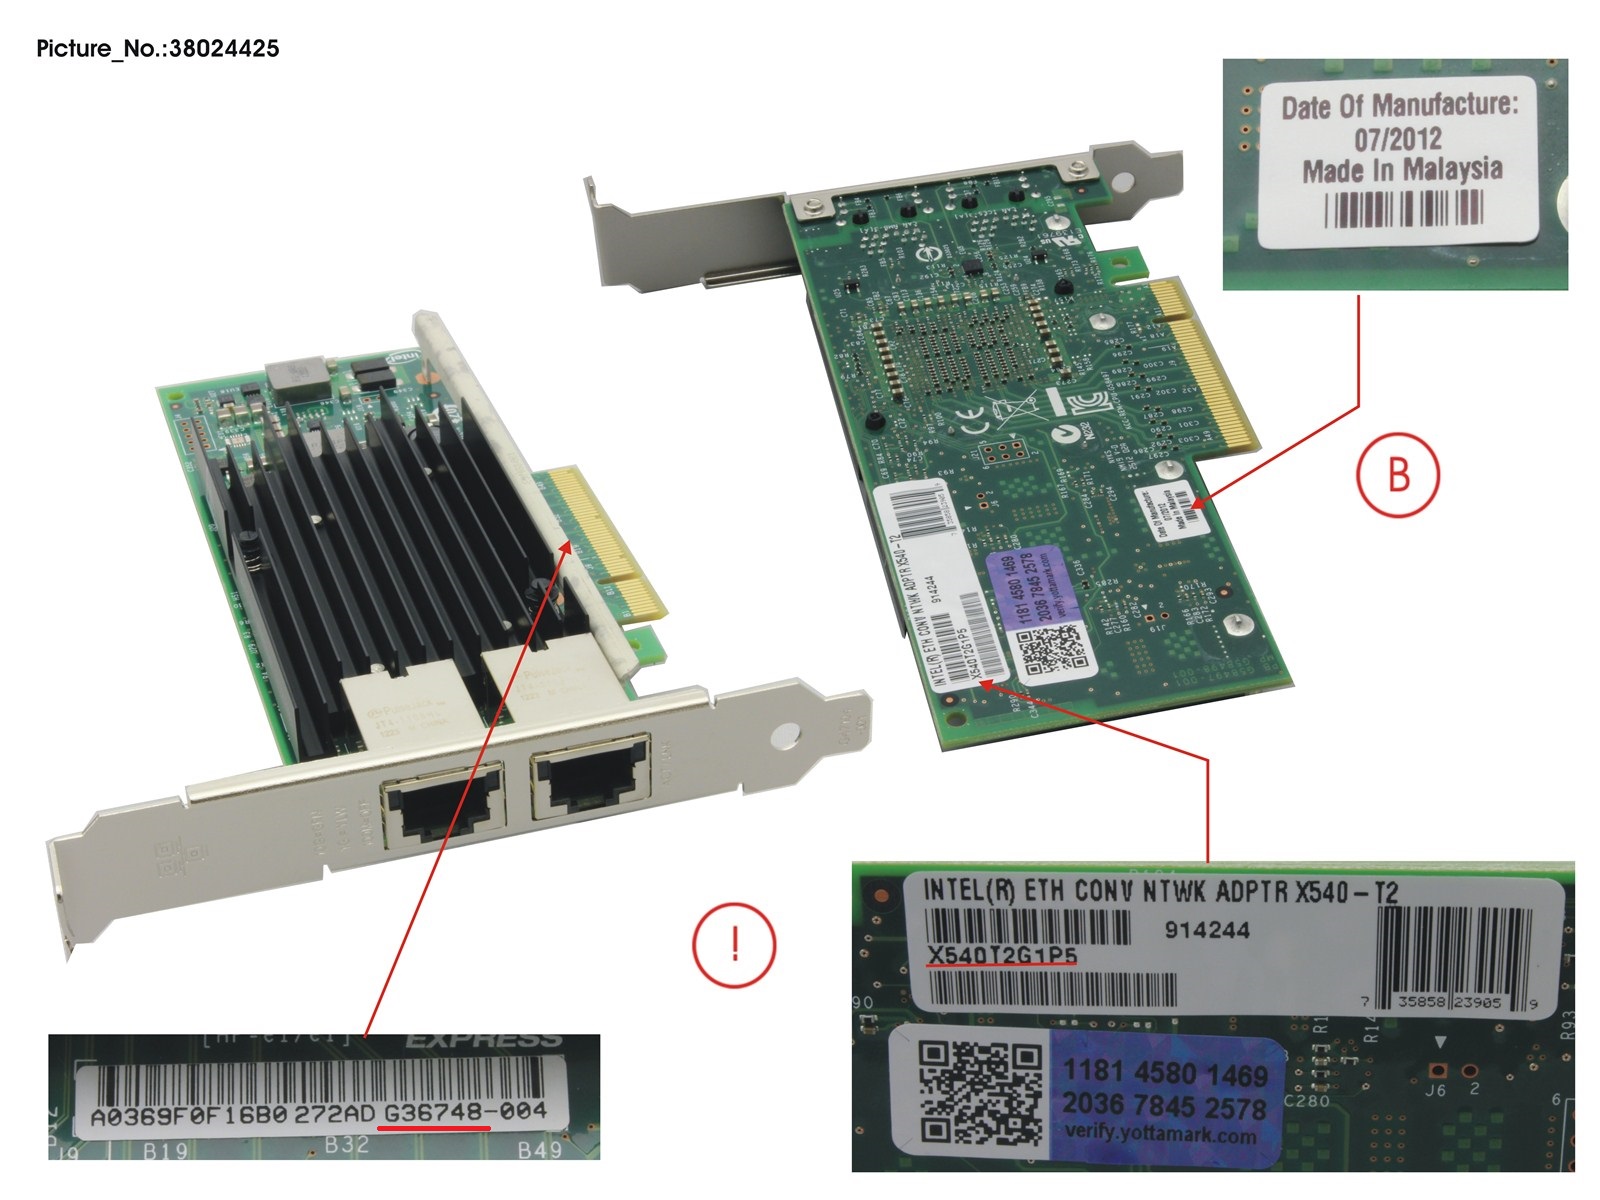 FTS ETHERNET CONVERGED NETWORK ADAPTER